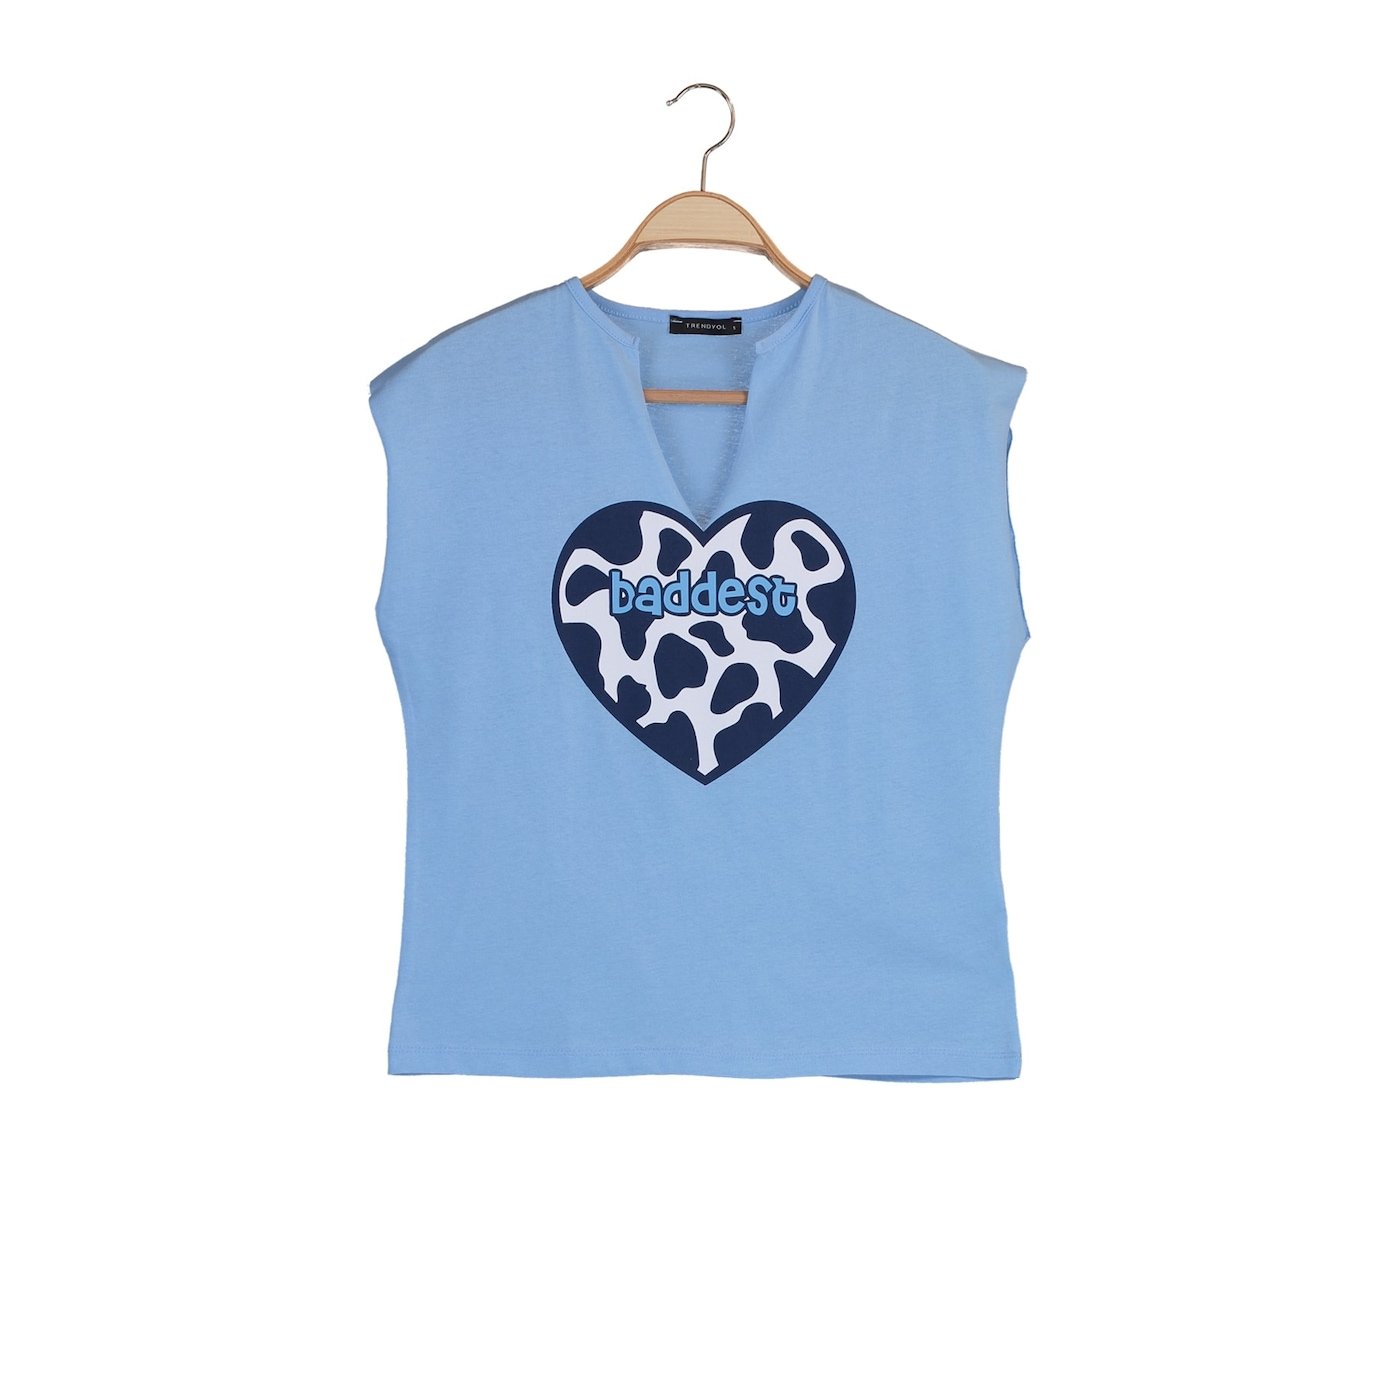 Trendyol Blue Printed Semifitted Knitted T-Shirt